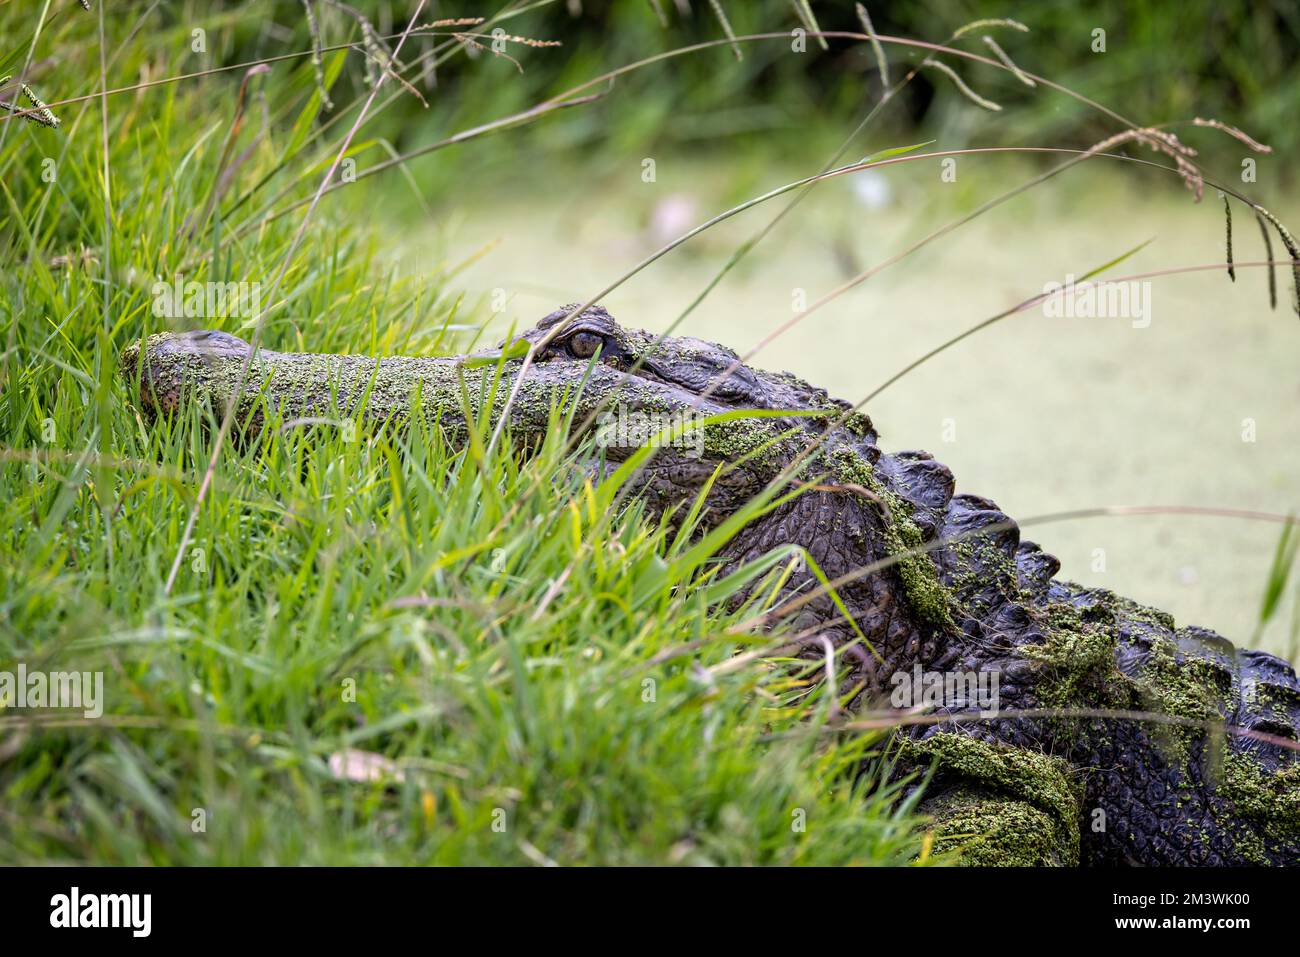 Close up of an Alligator climbing out of the water onto the bank Stock Photo